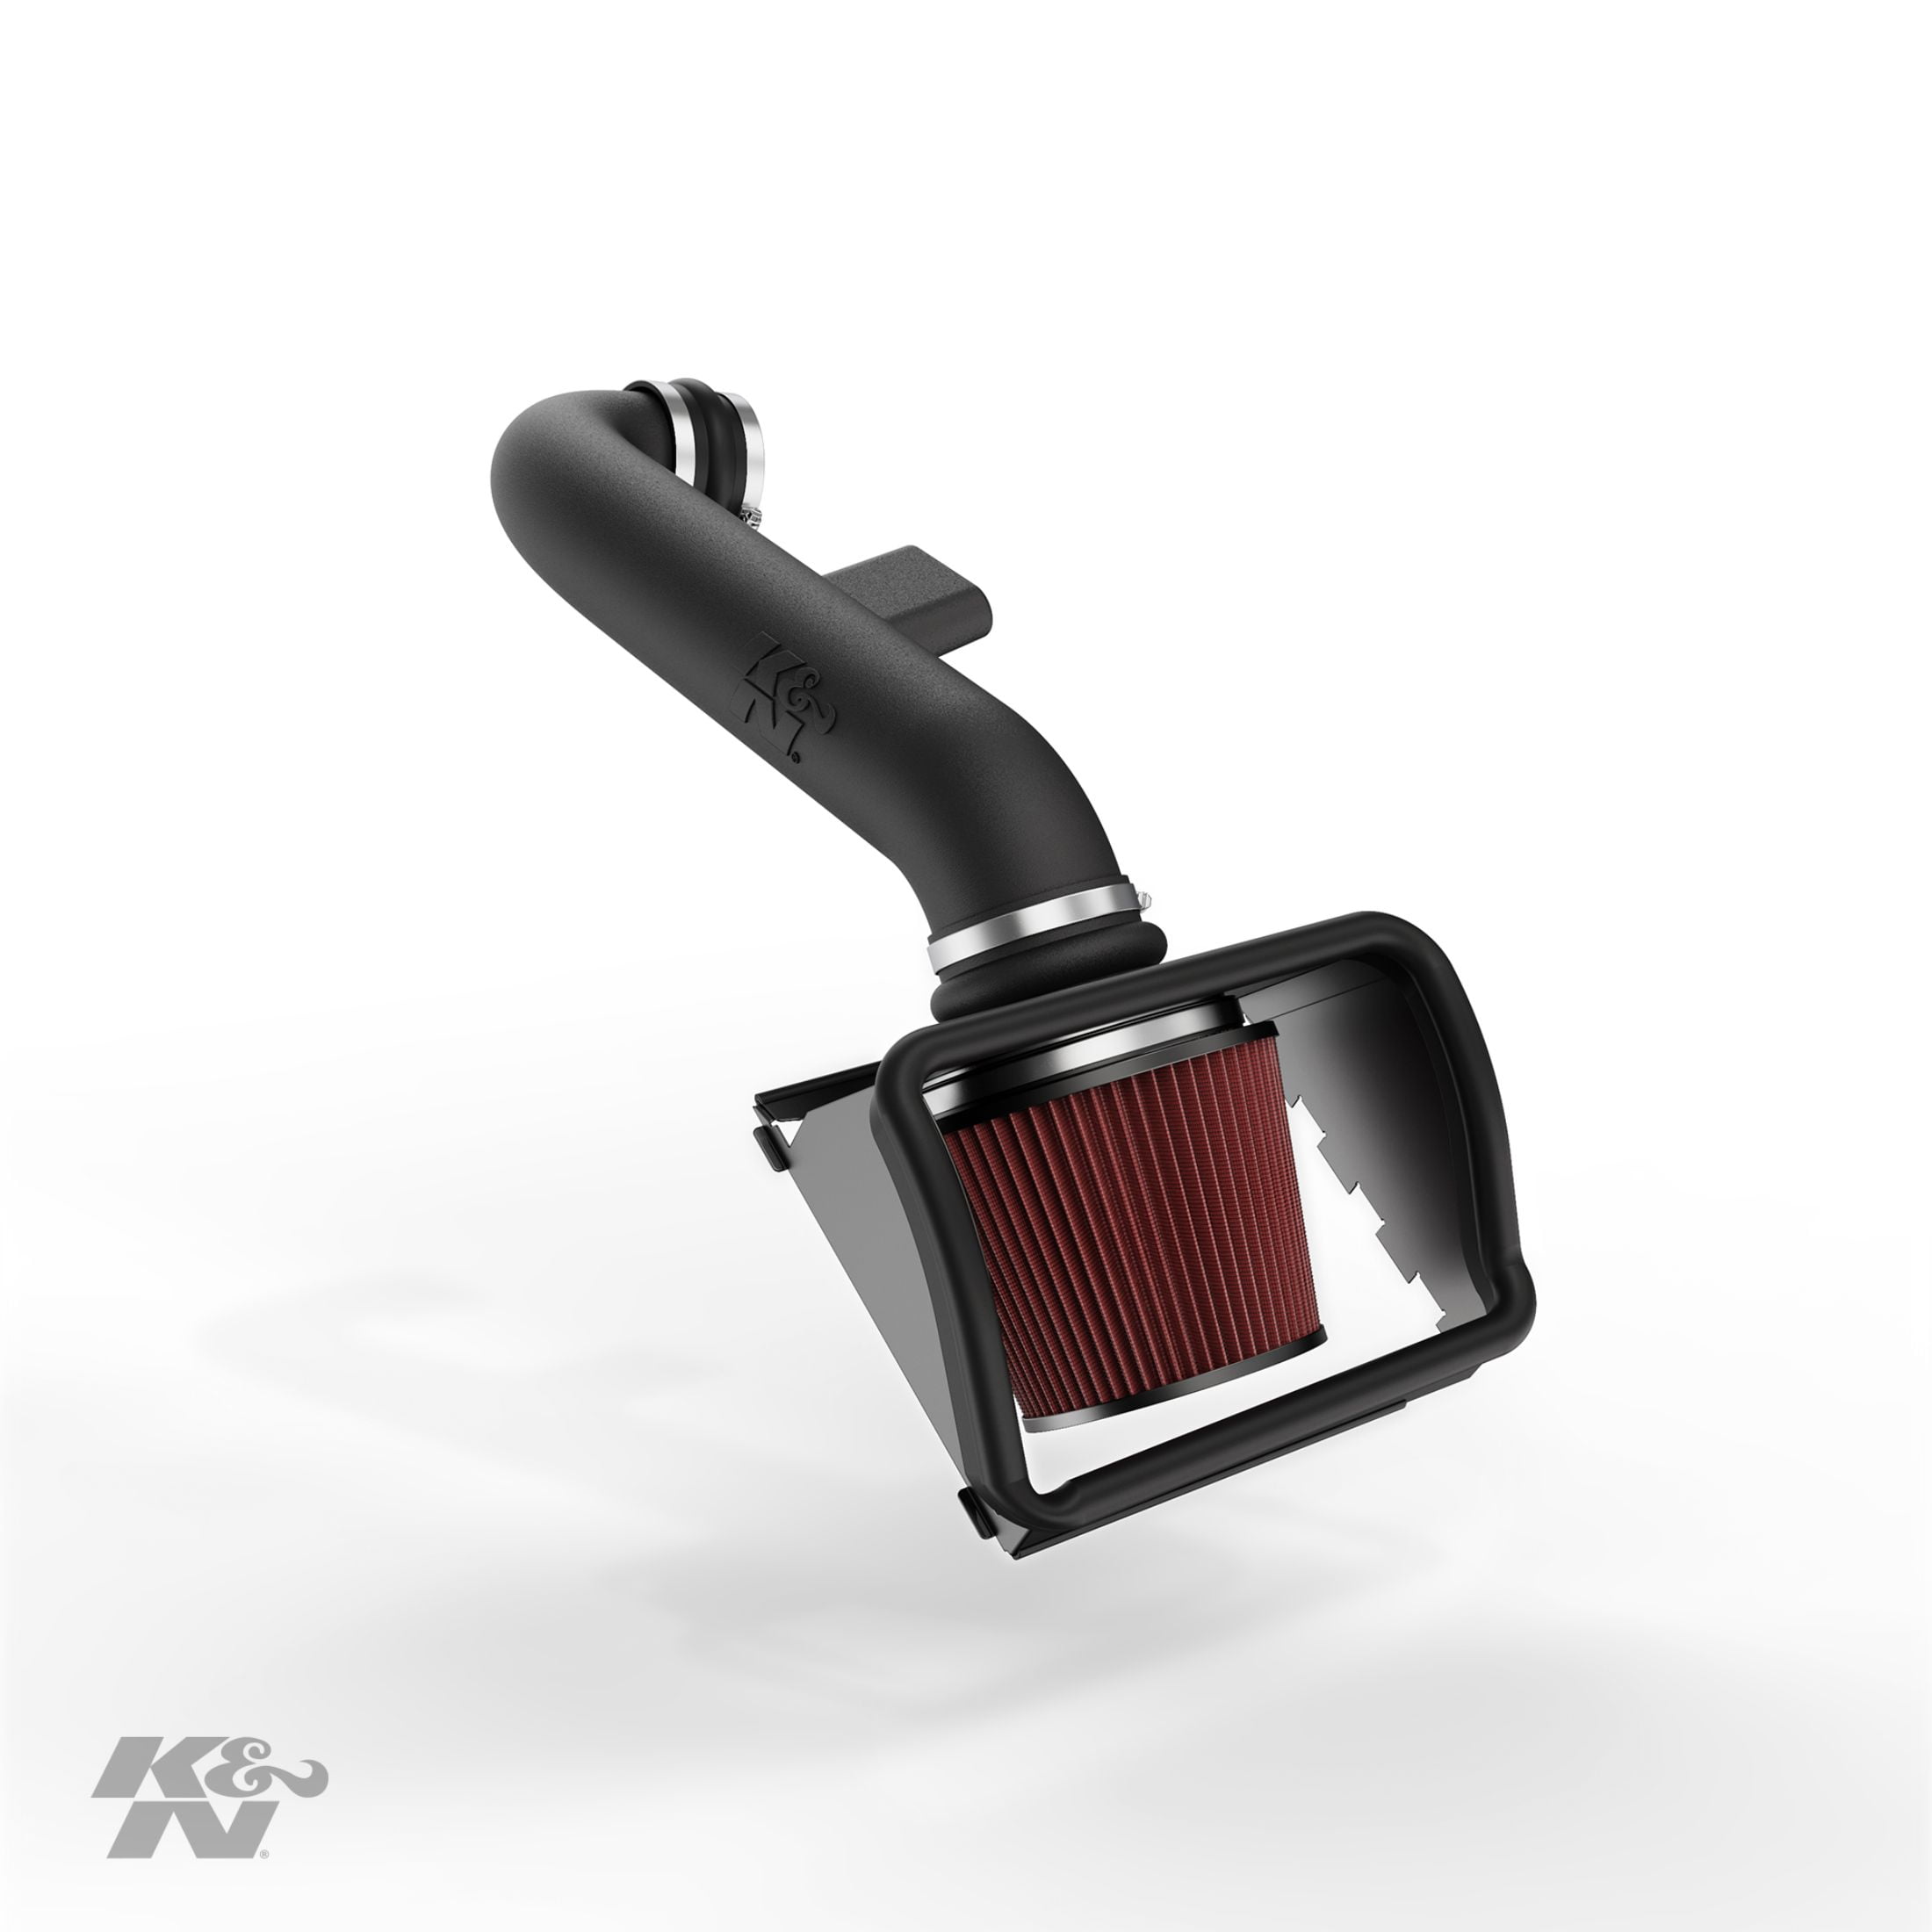 K&N PERFORMANCE COLD AIR INTAKE SYSTEM FOR 2015 FORD F150 5.0L 